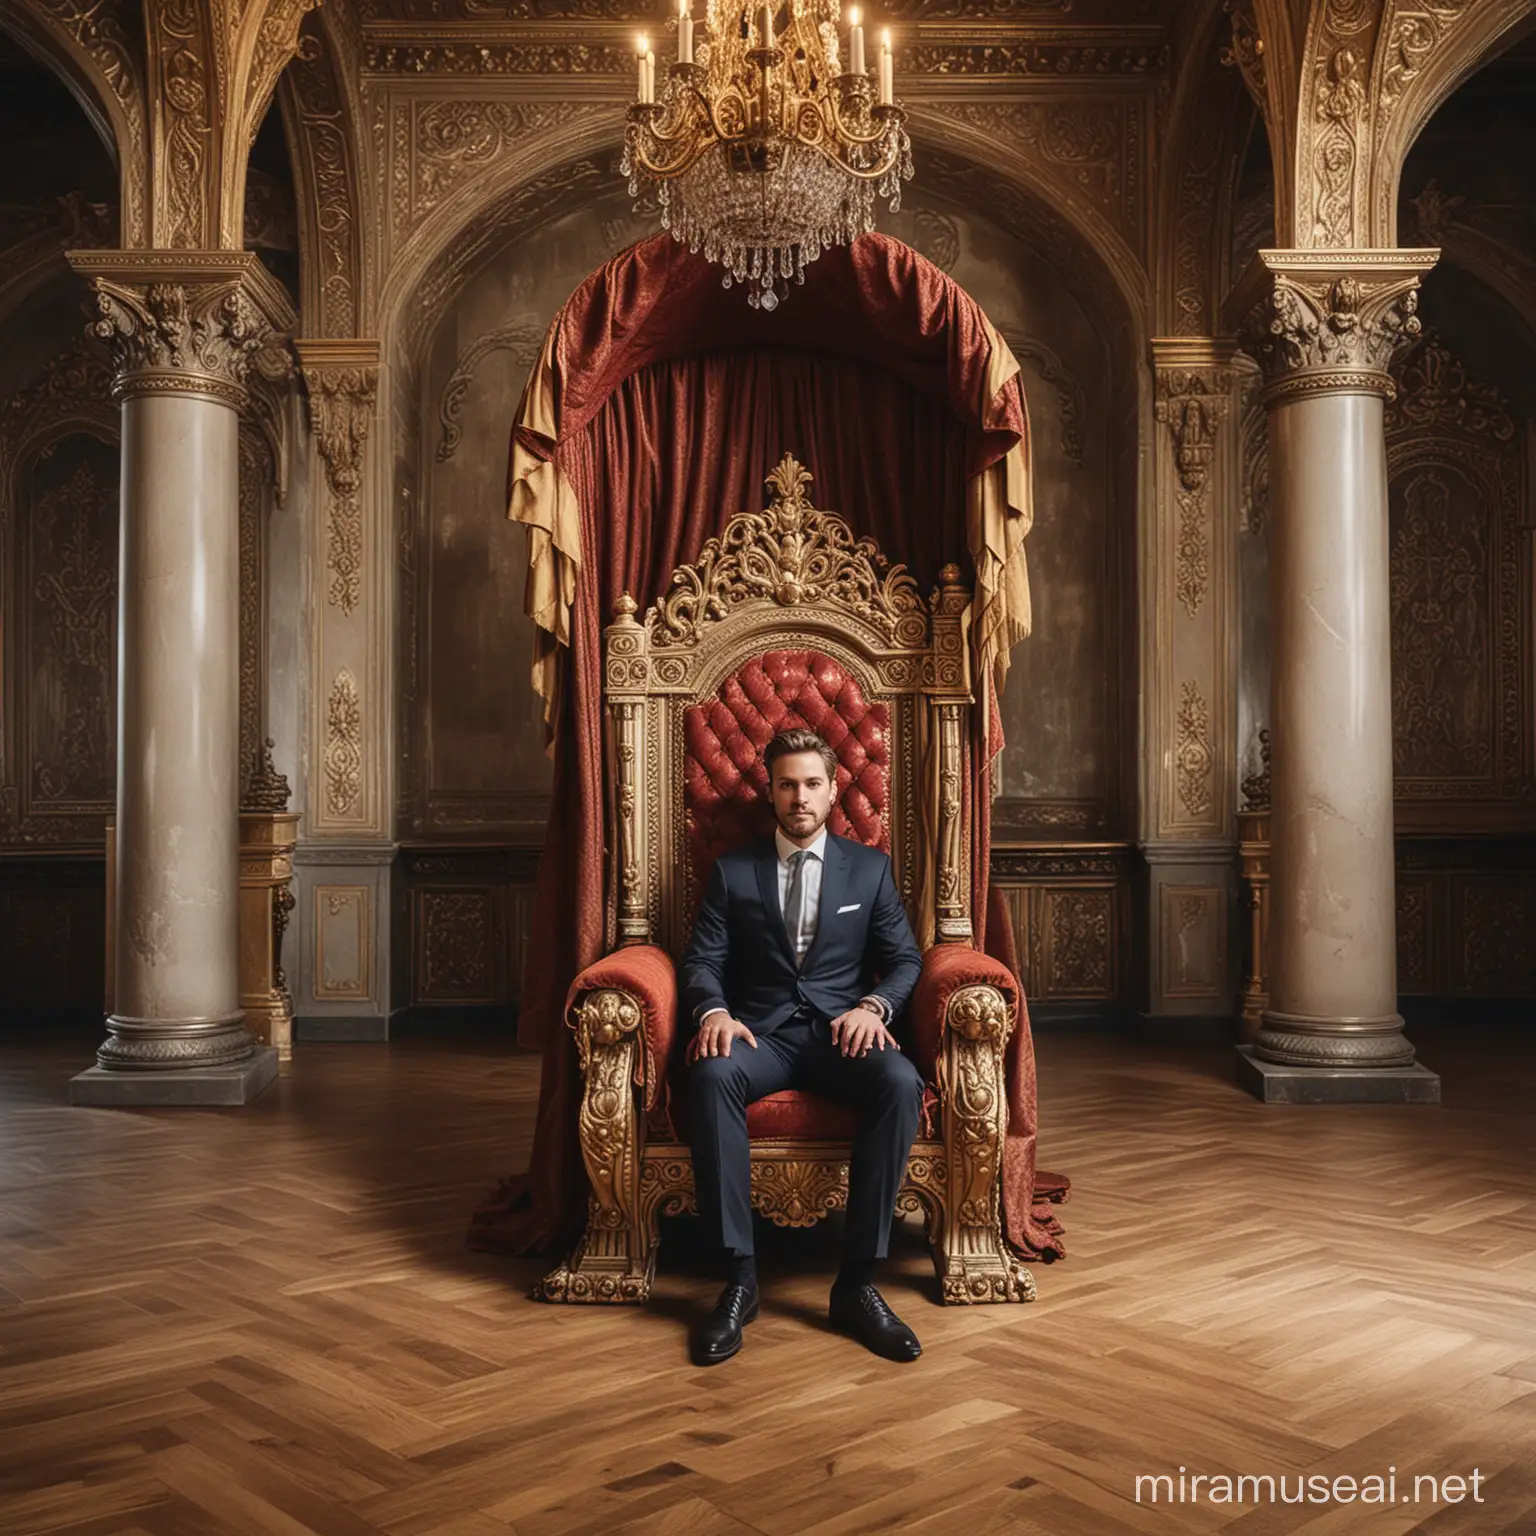 Business Person Sitting on Ornate Royal Throne in Empty Room